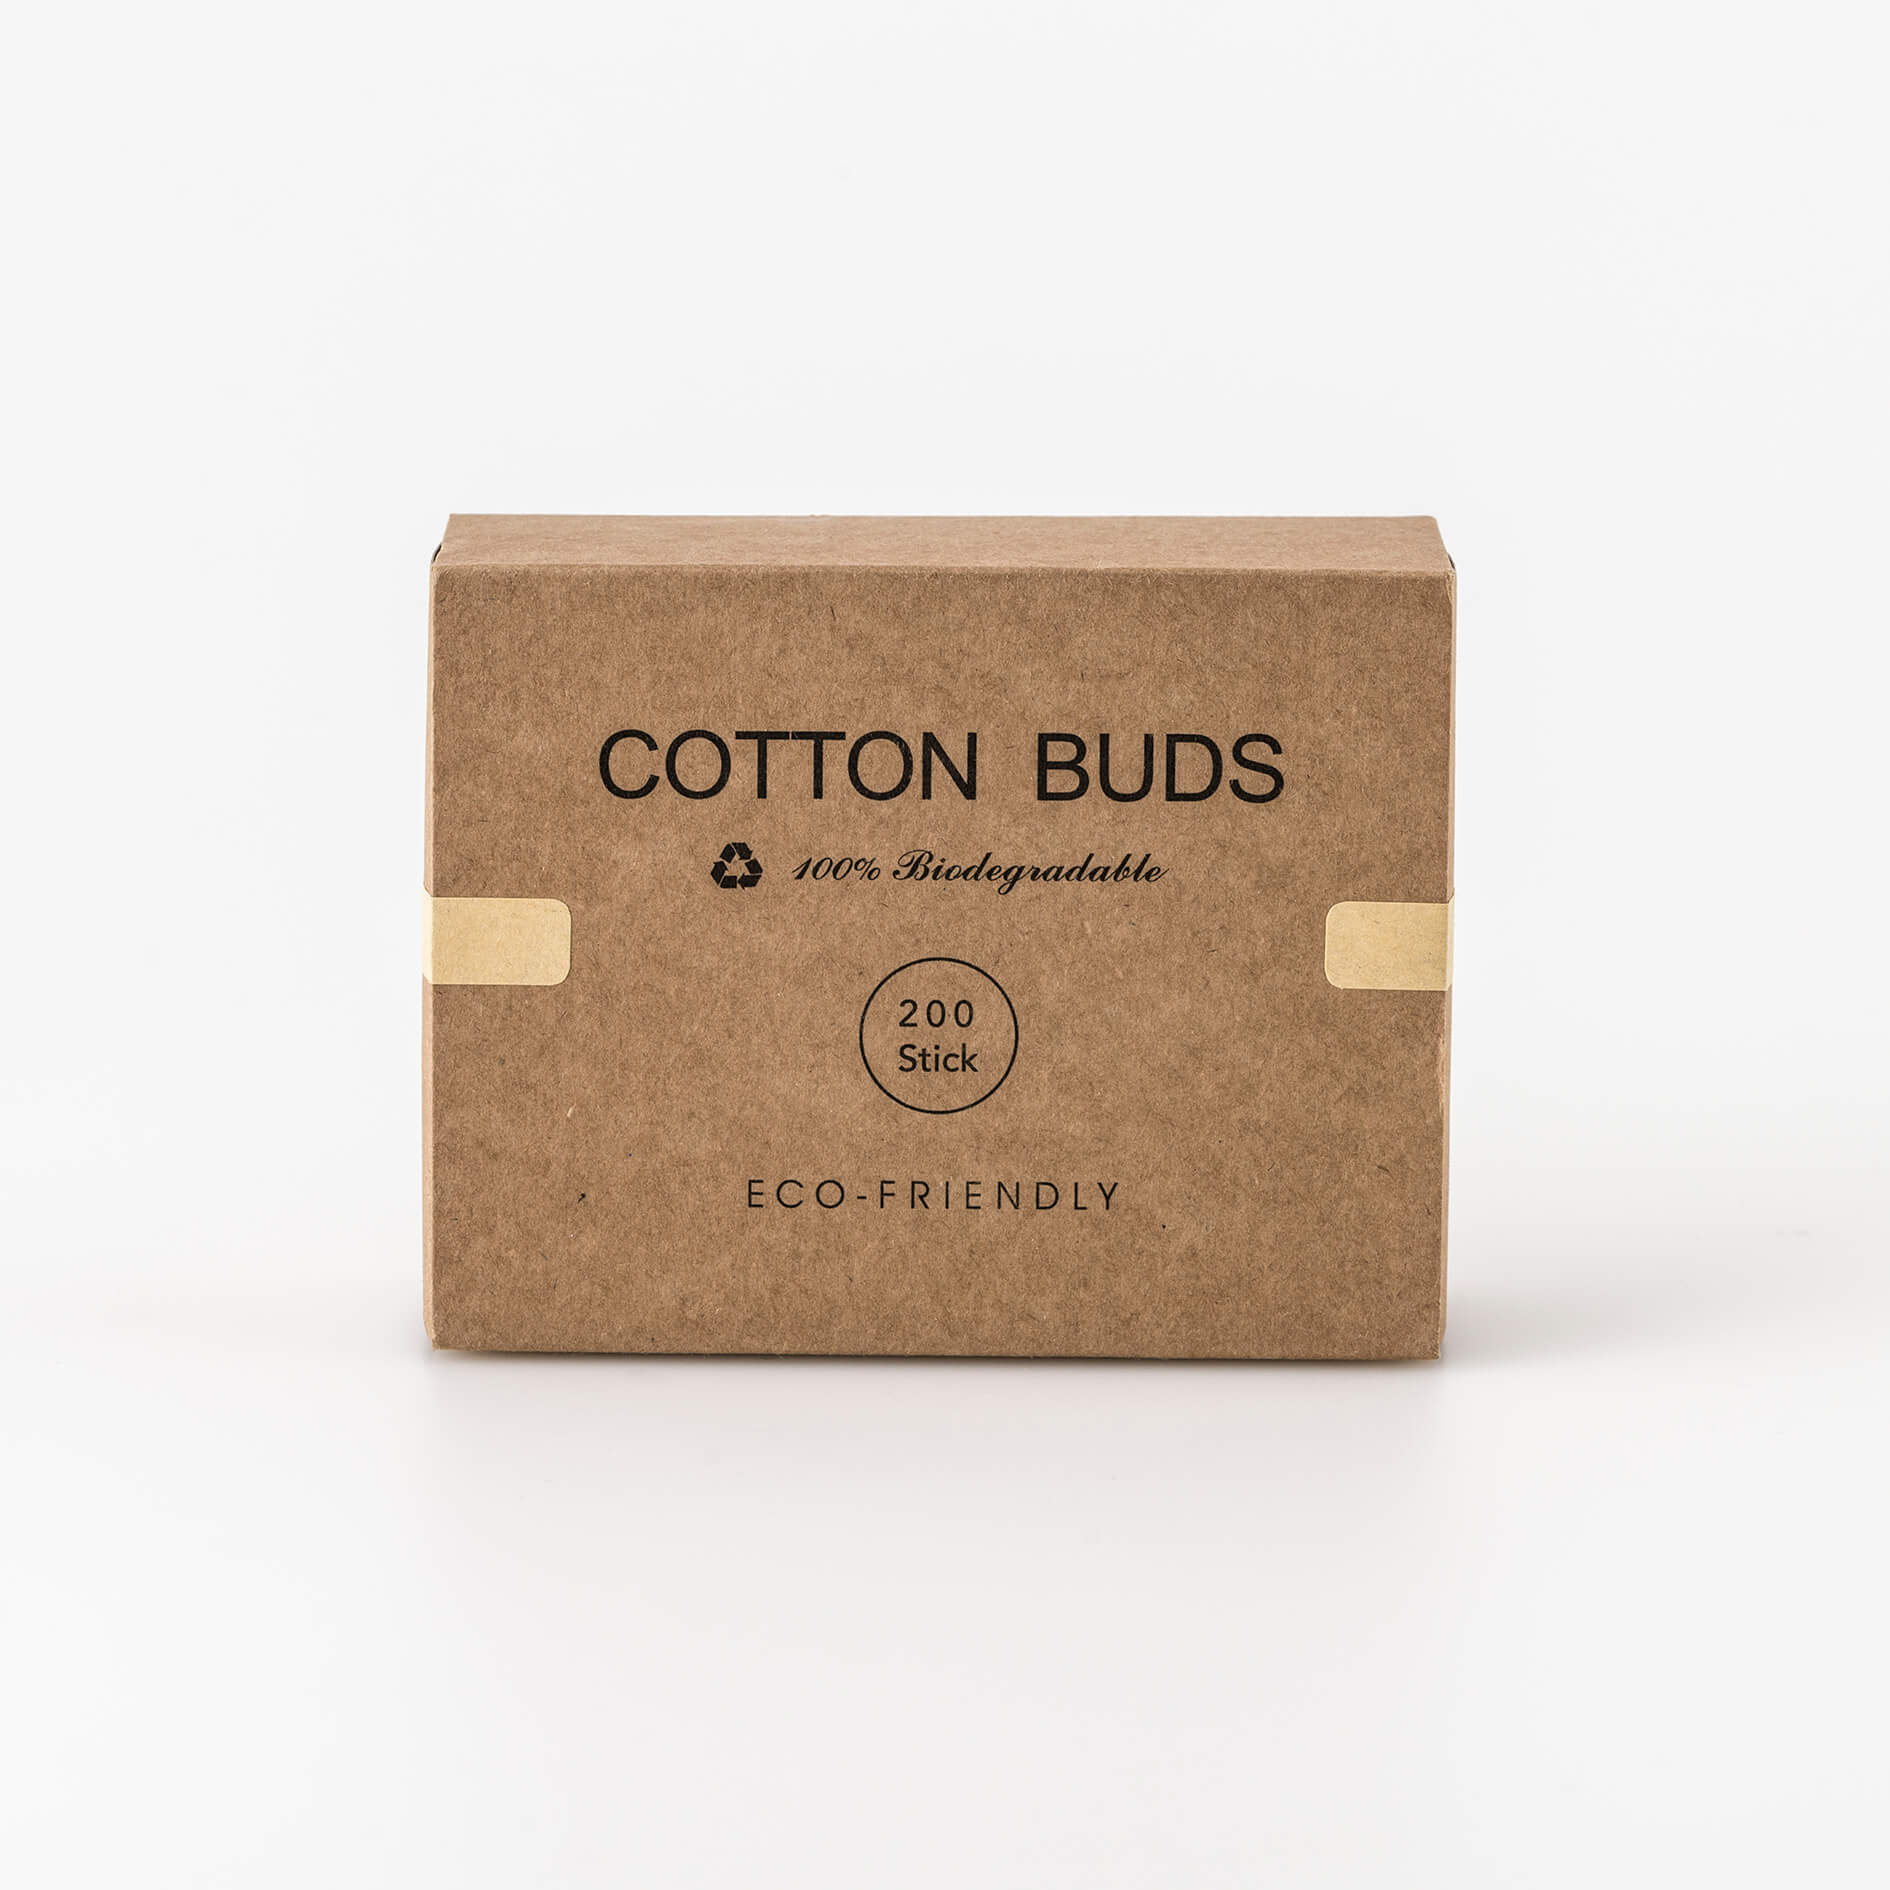 Eco-friendly cotton buds in a draw style box. 100% biodegradable and plastic free. 